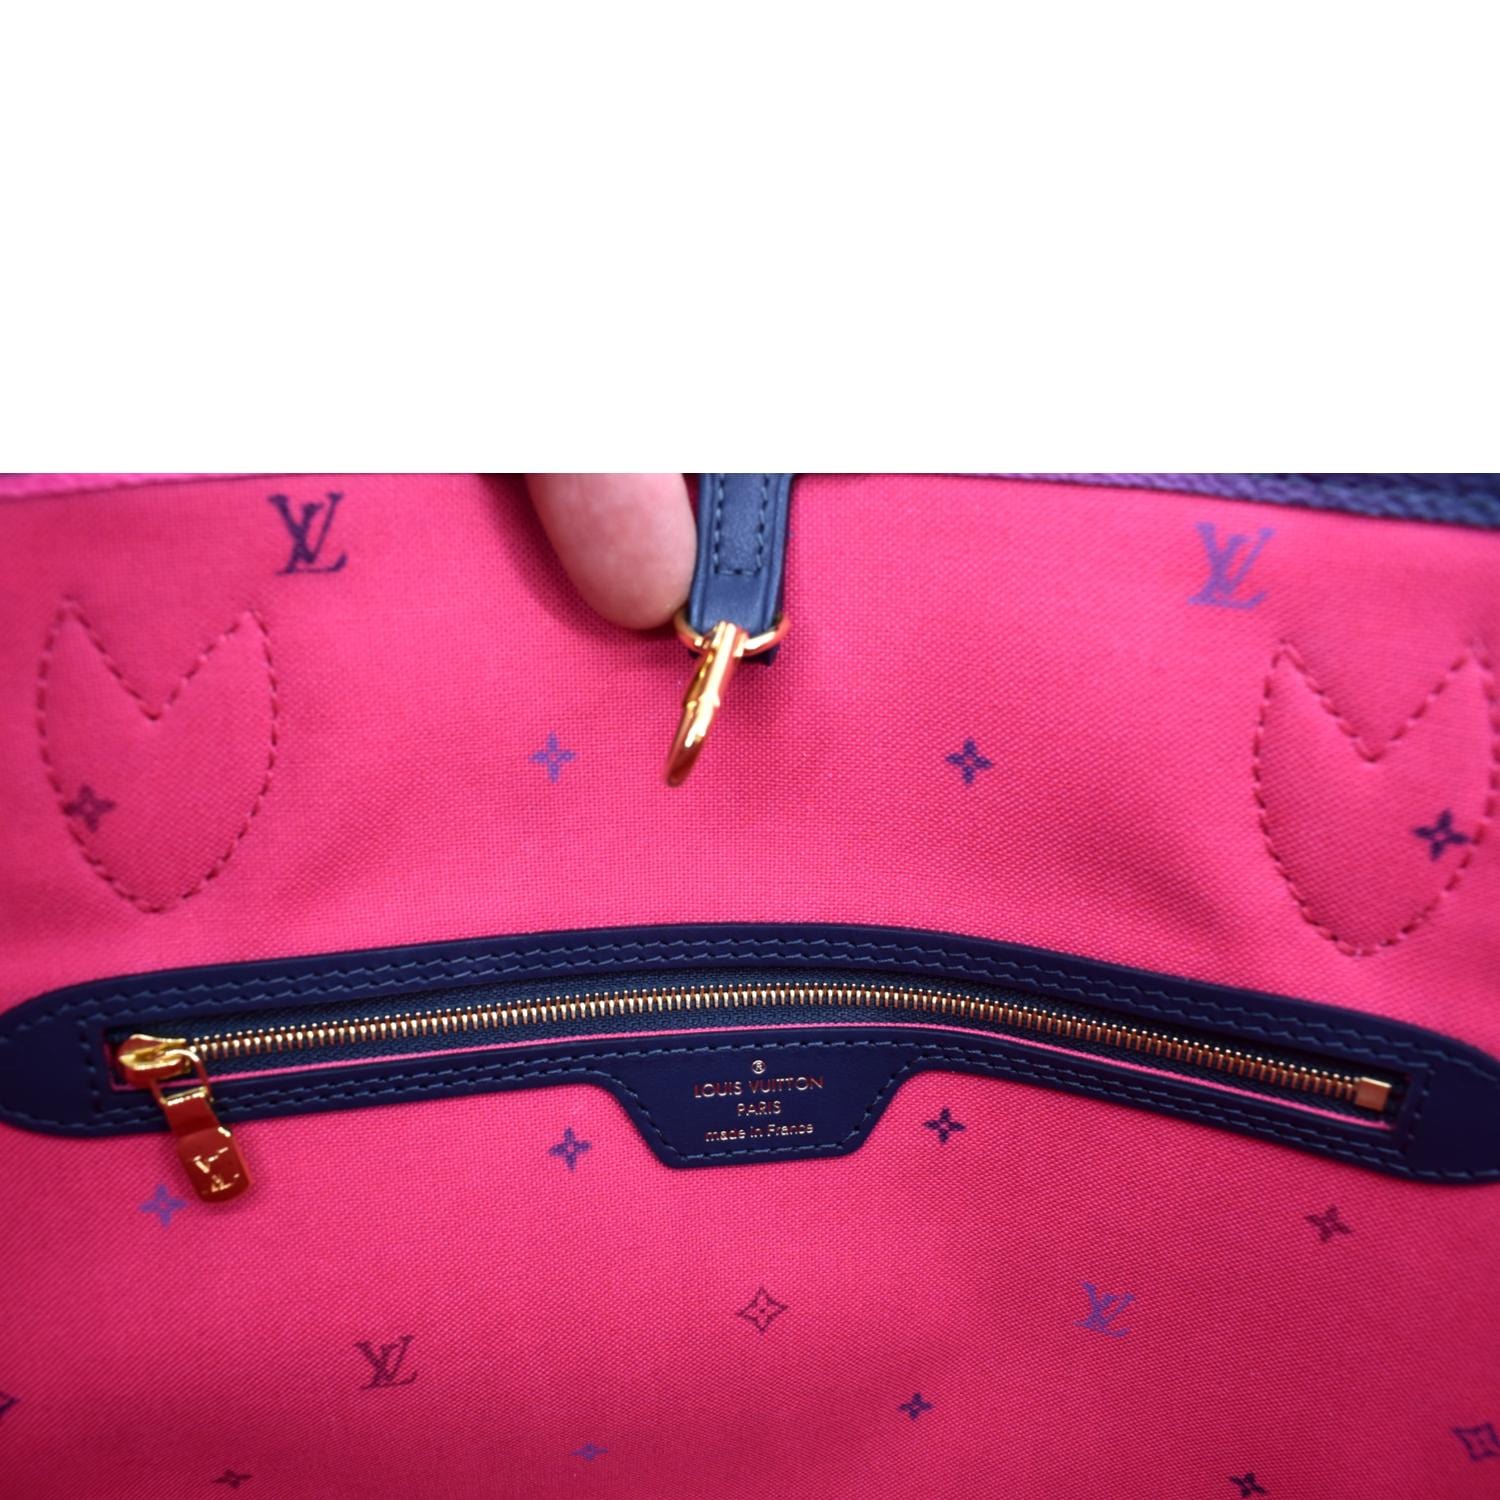 Louis Vuitton Neverfull Mm Midnight Fuschia. This camera does not